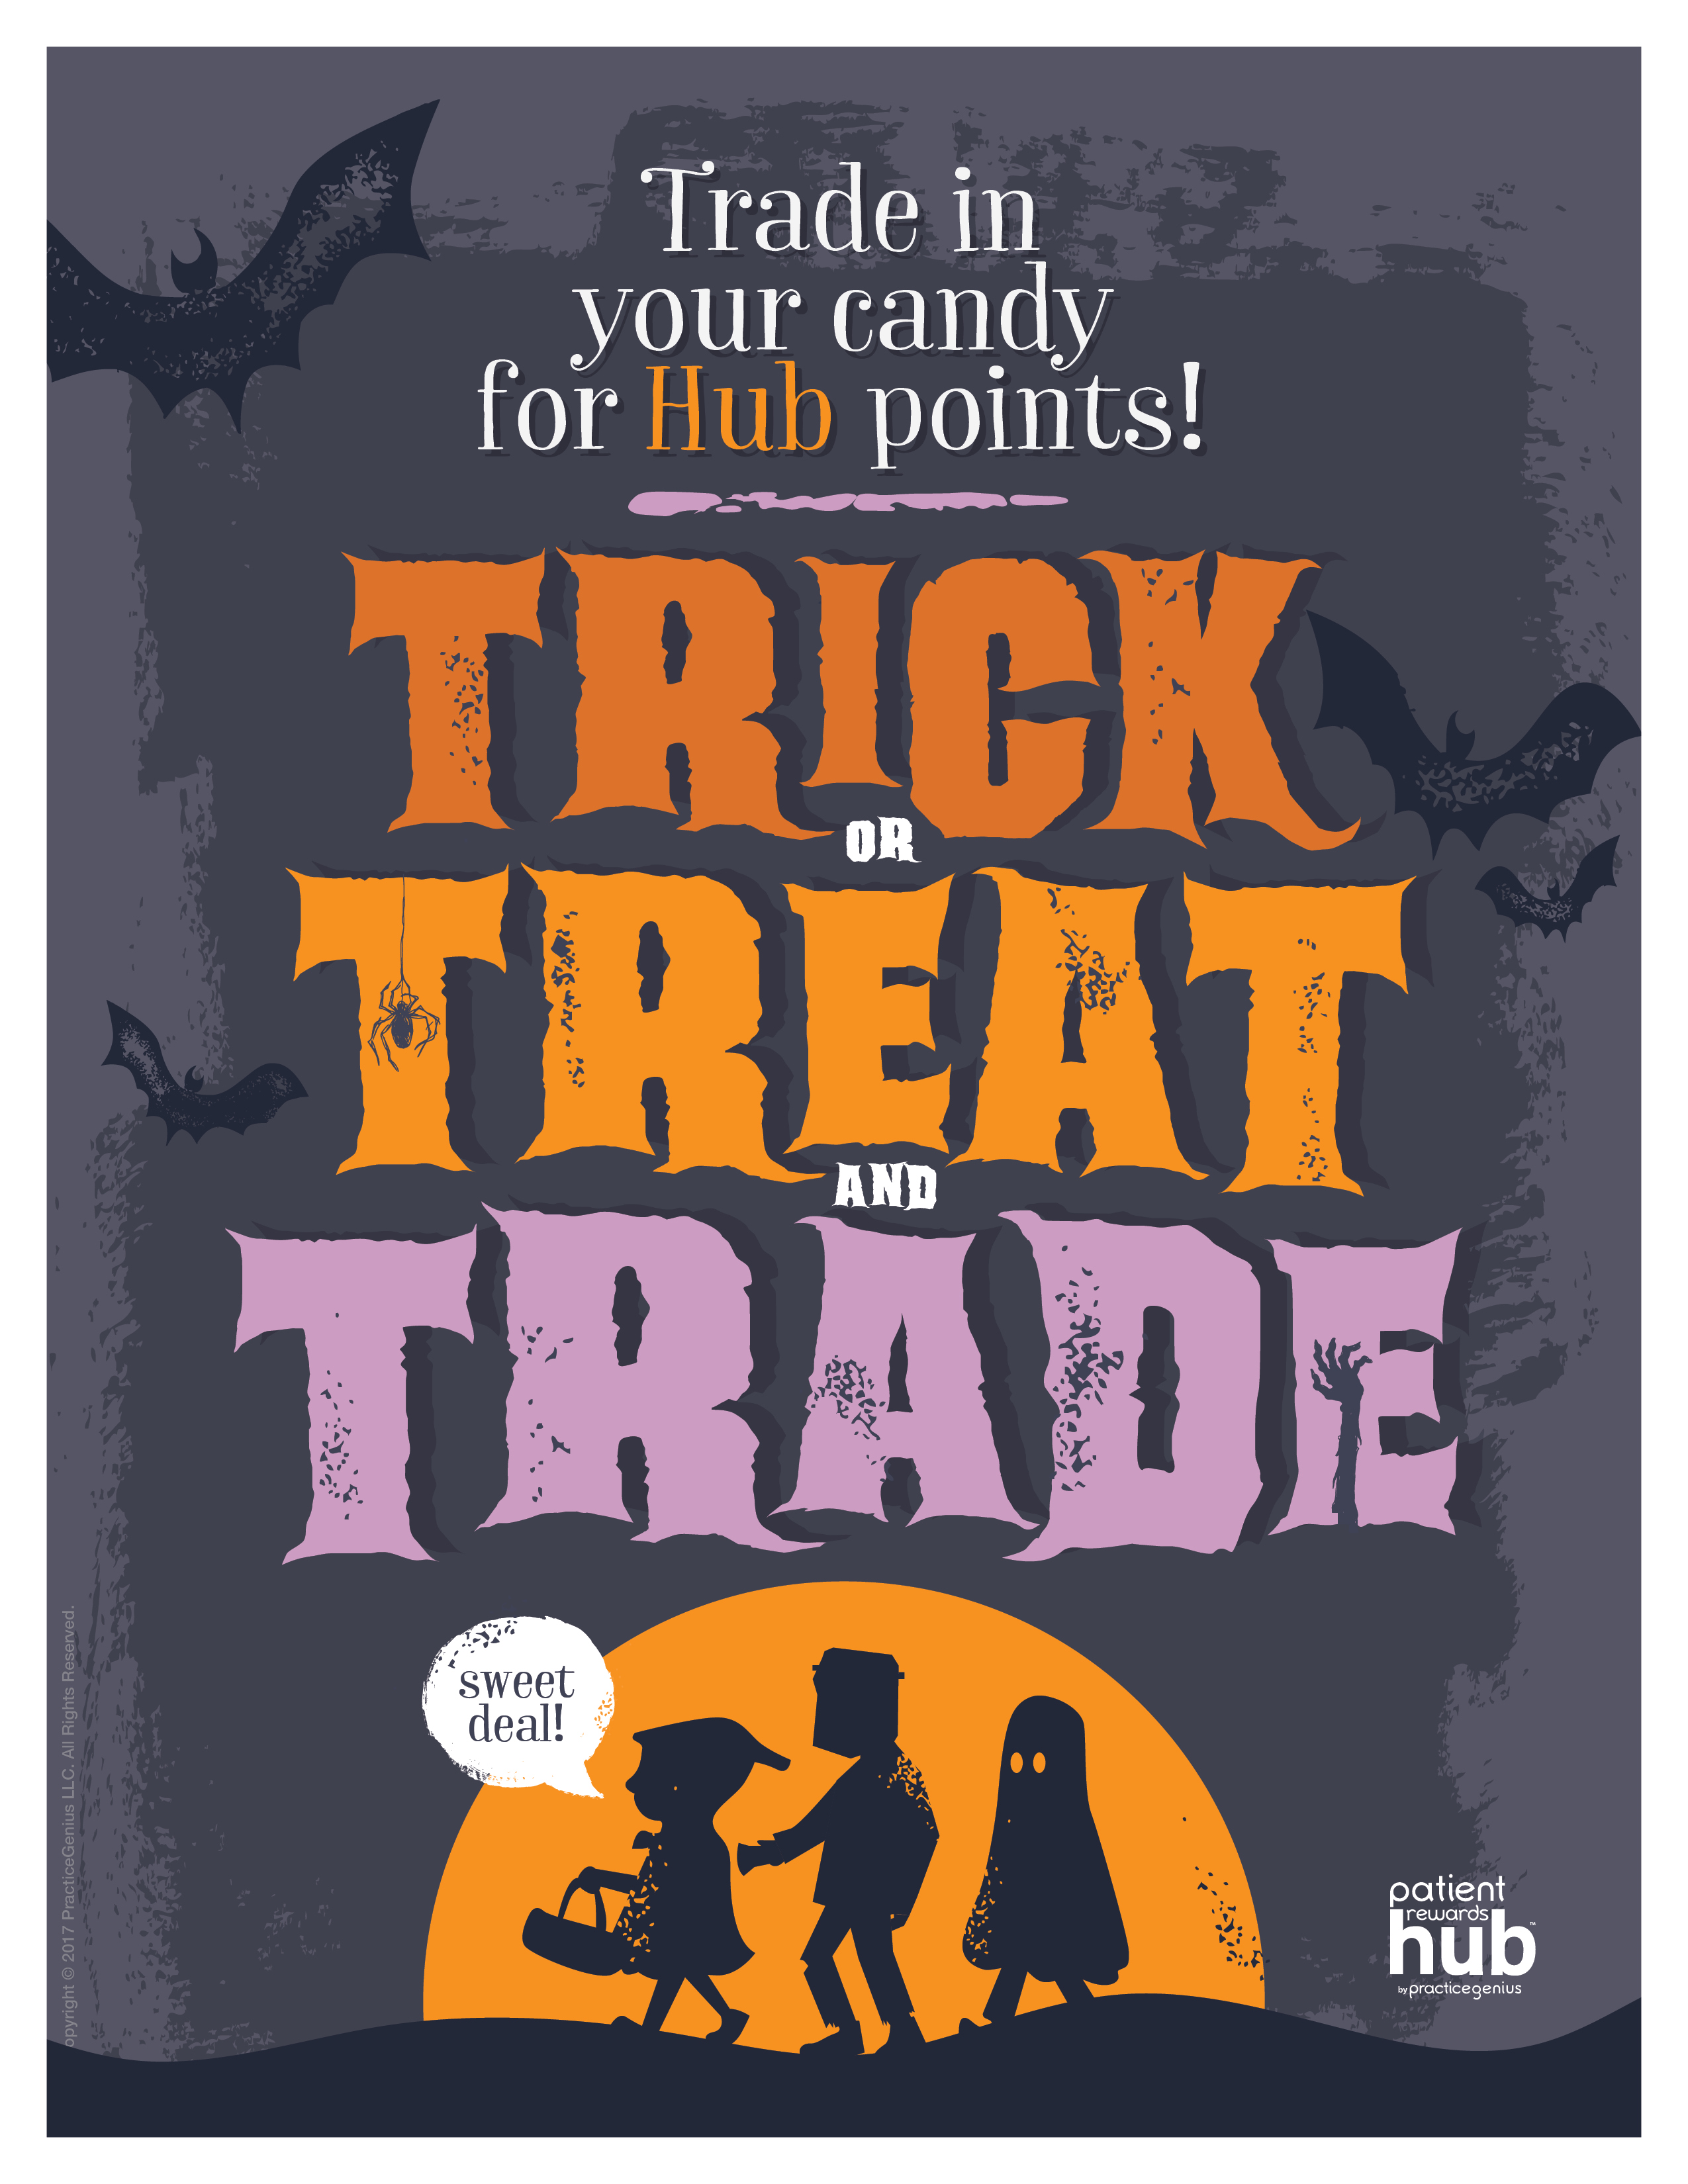 Candy_Trade_In_Poster.jpg